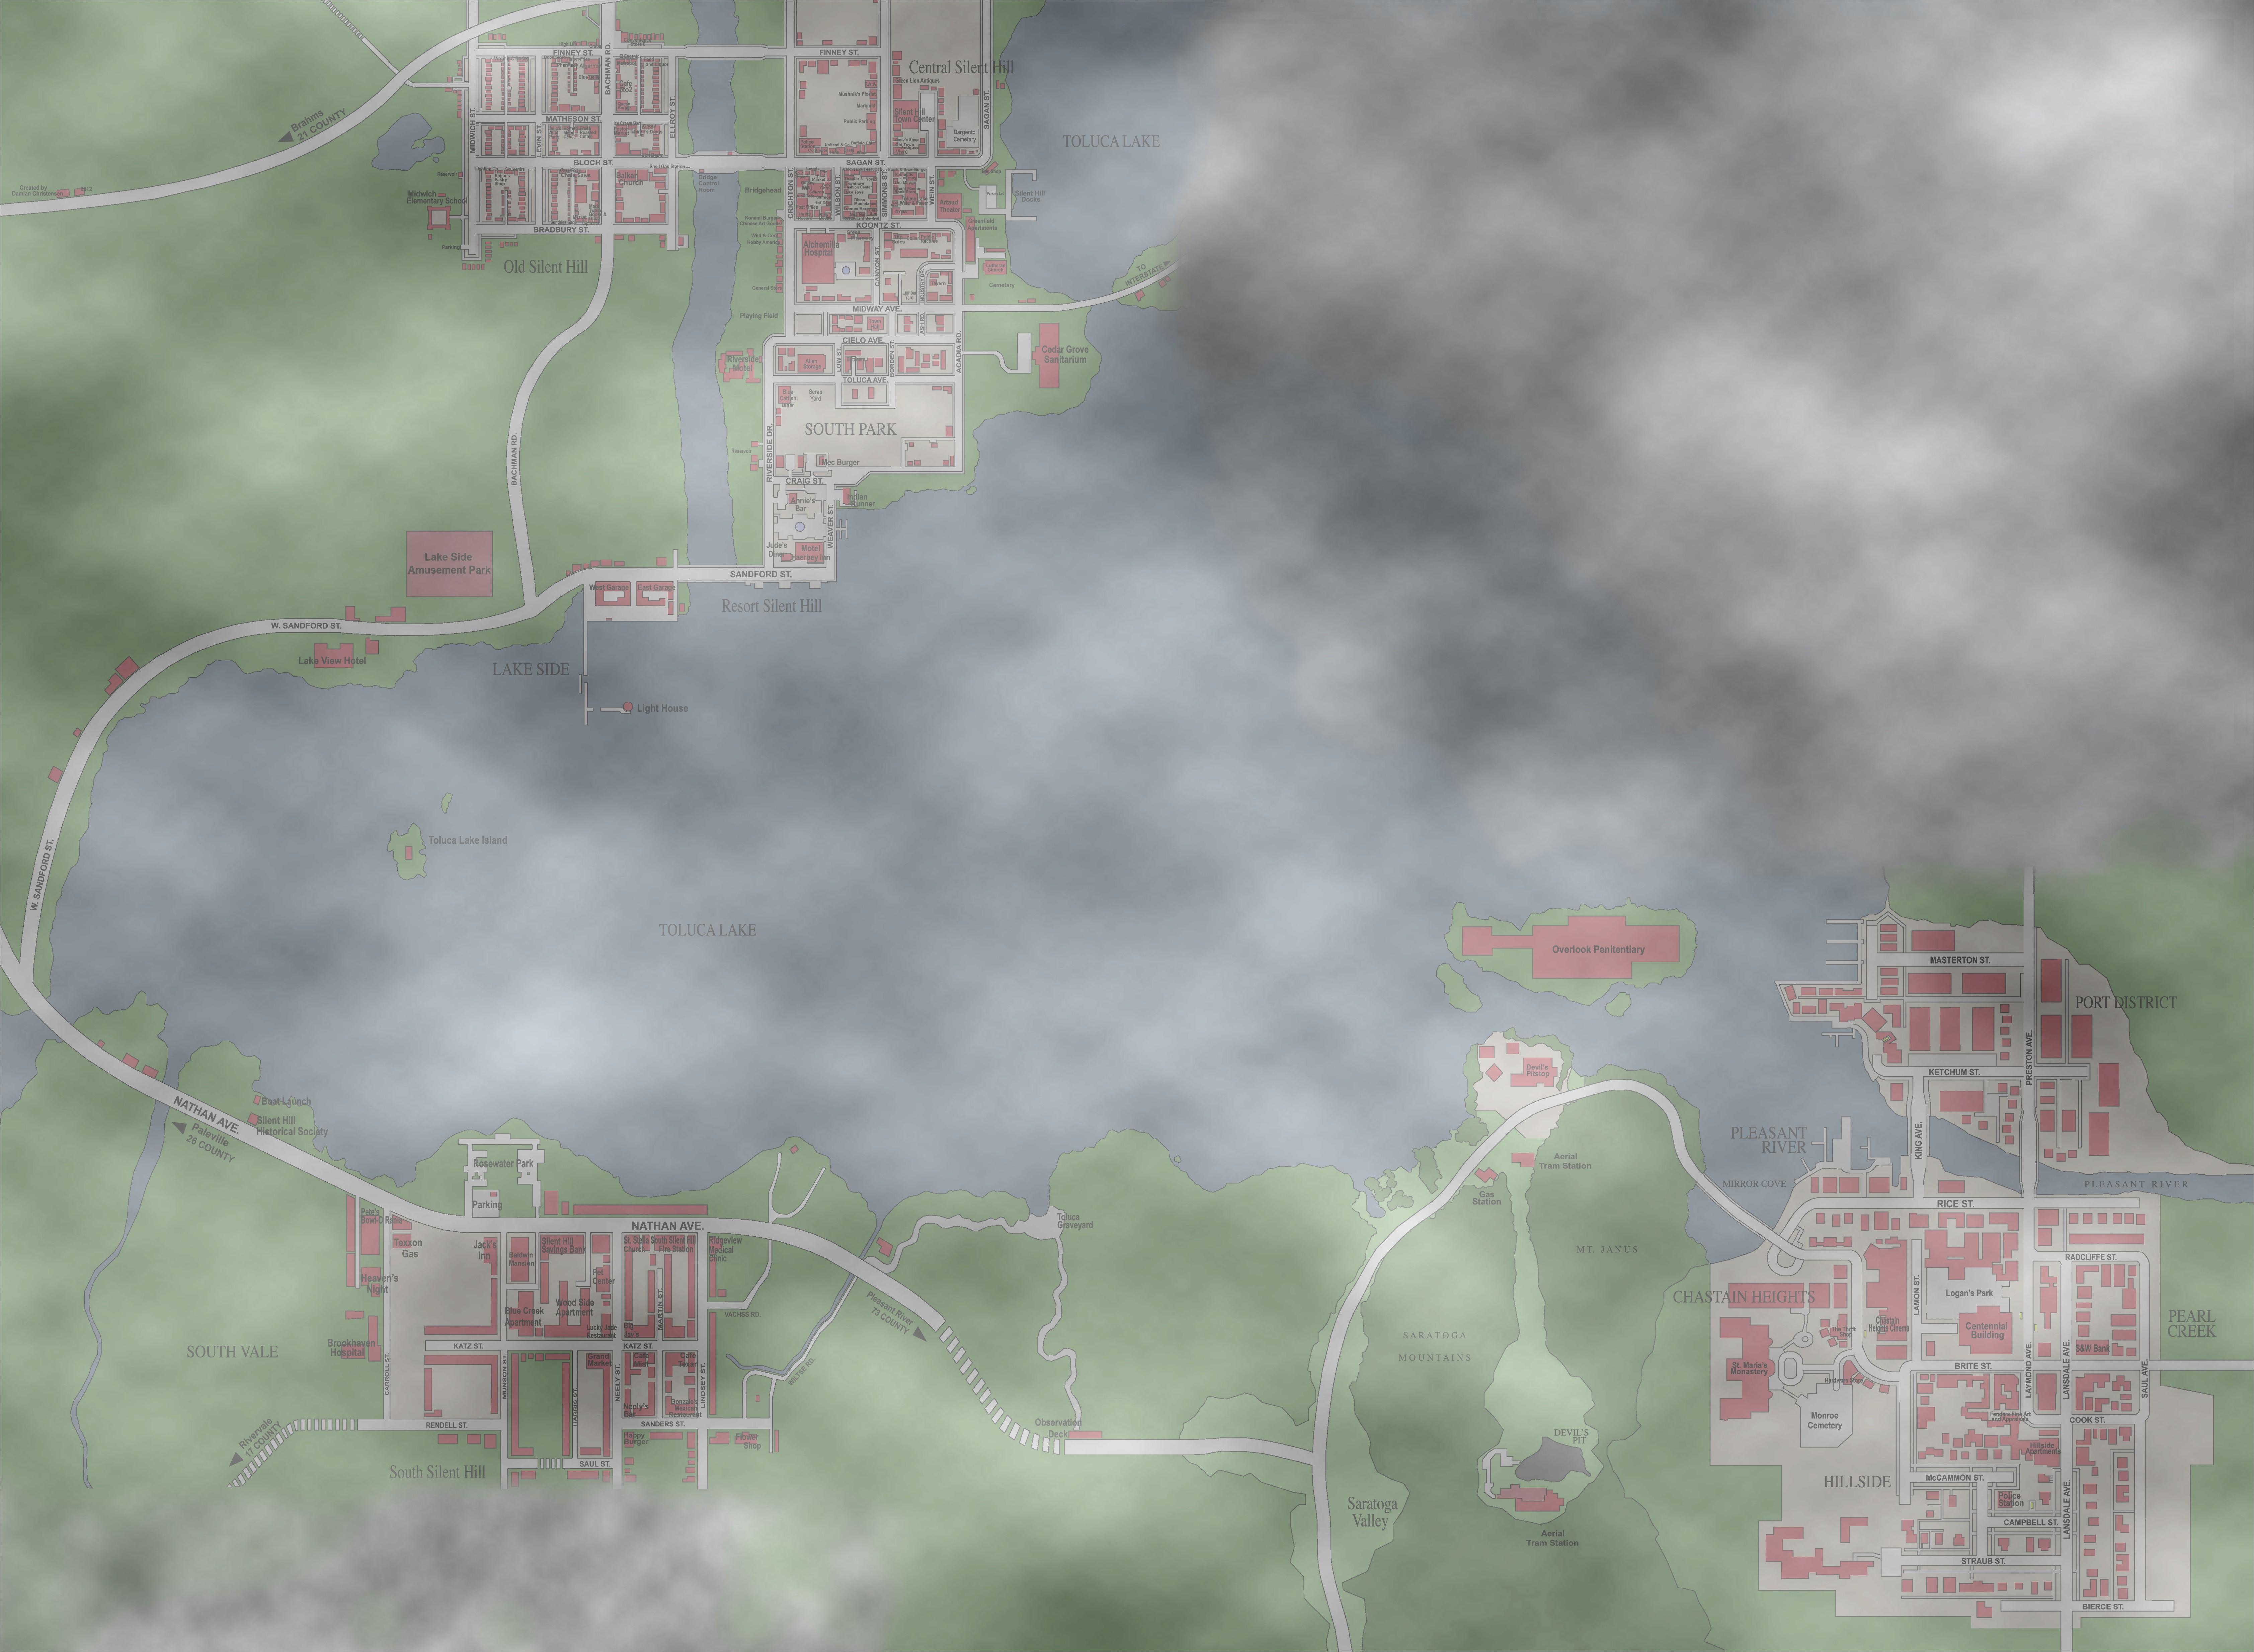 Silent Hill map  Silent hill, Silent hill game, Horror game